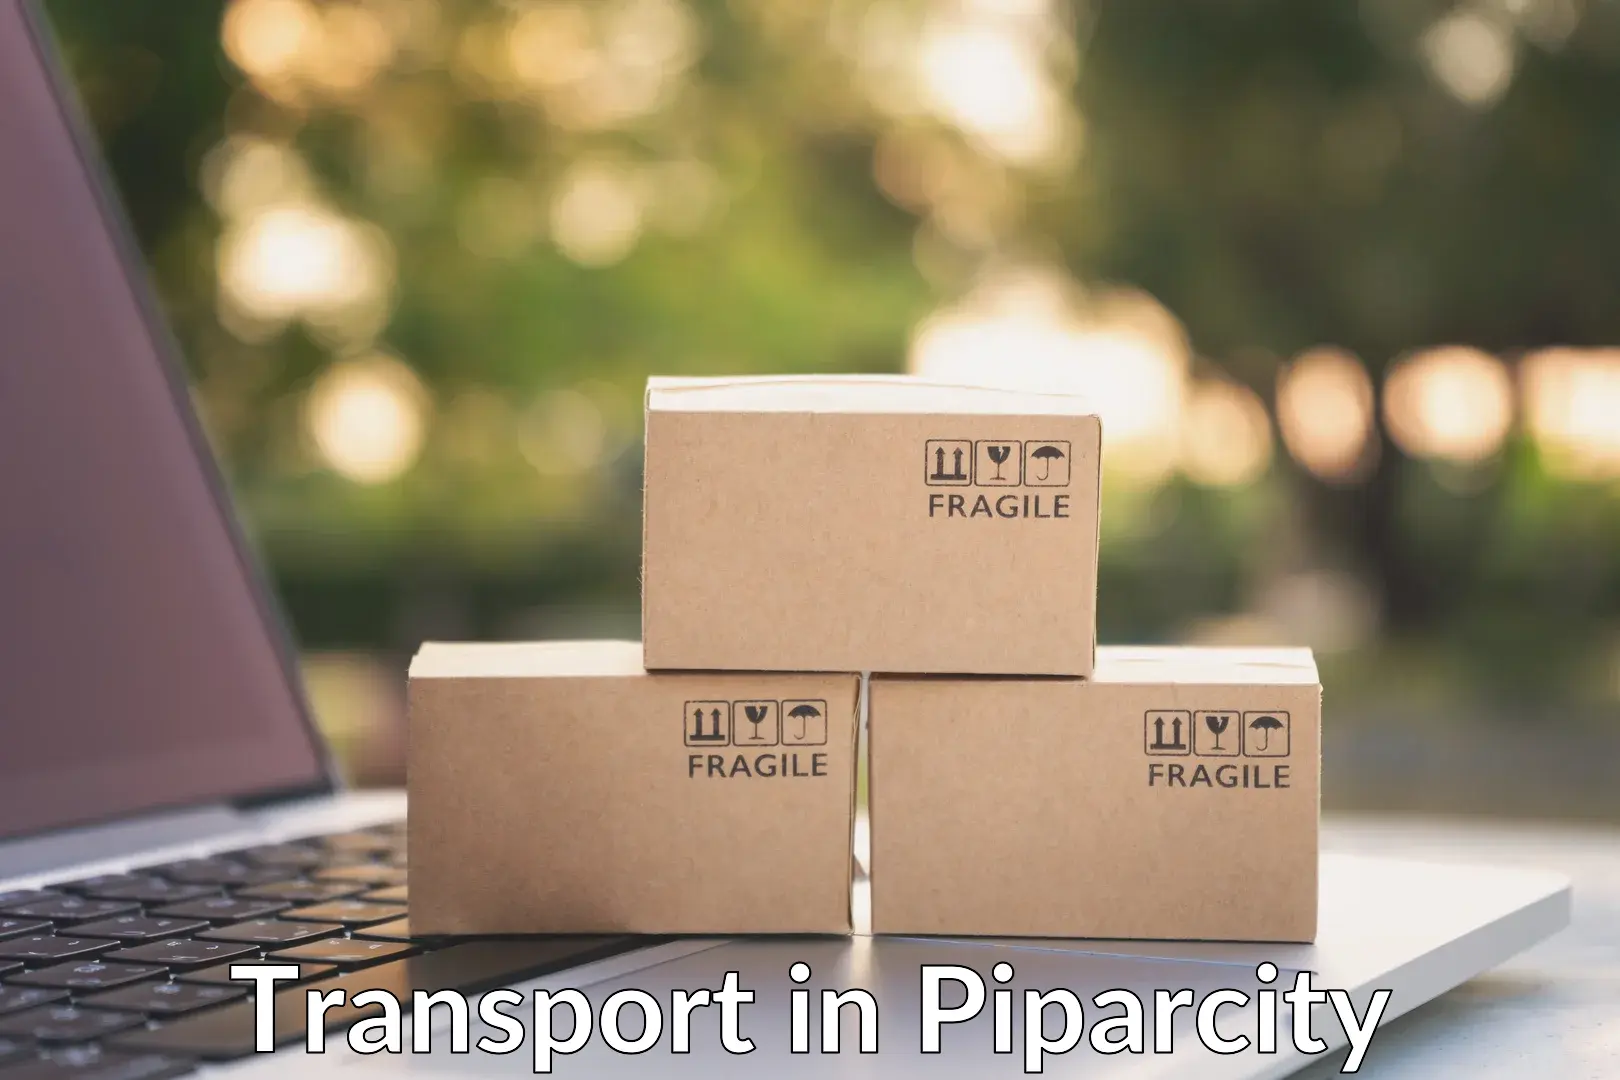 Daily parcel service transport in Piparcity